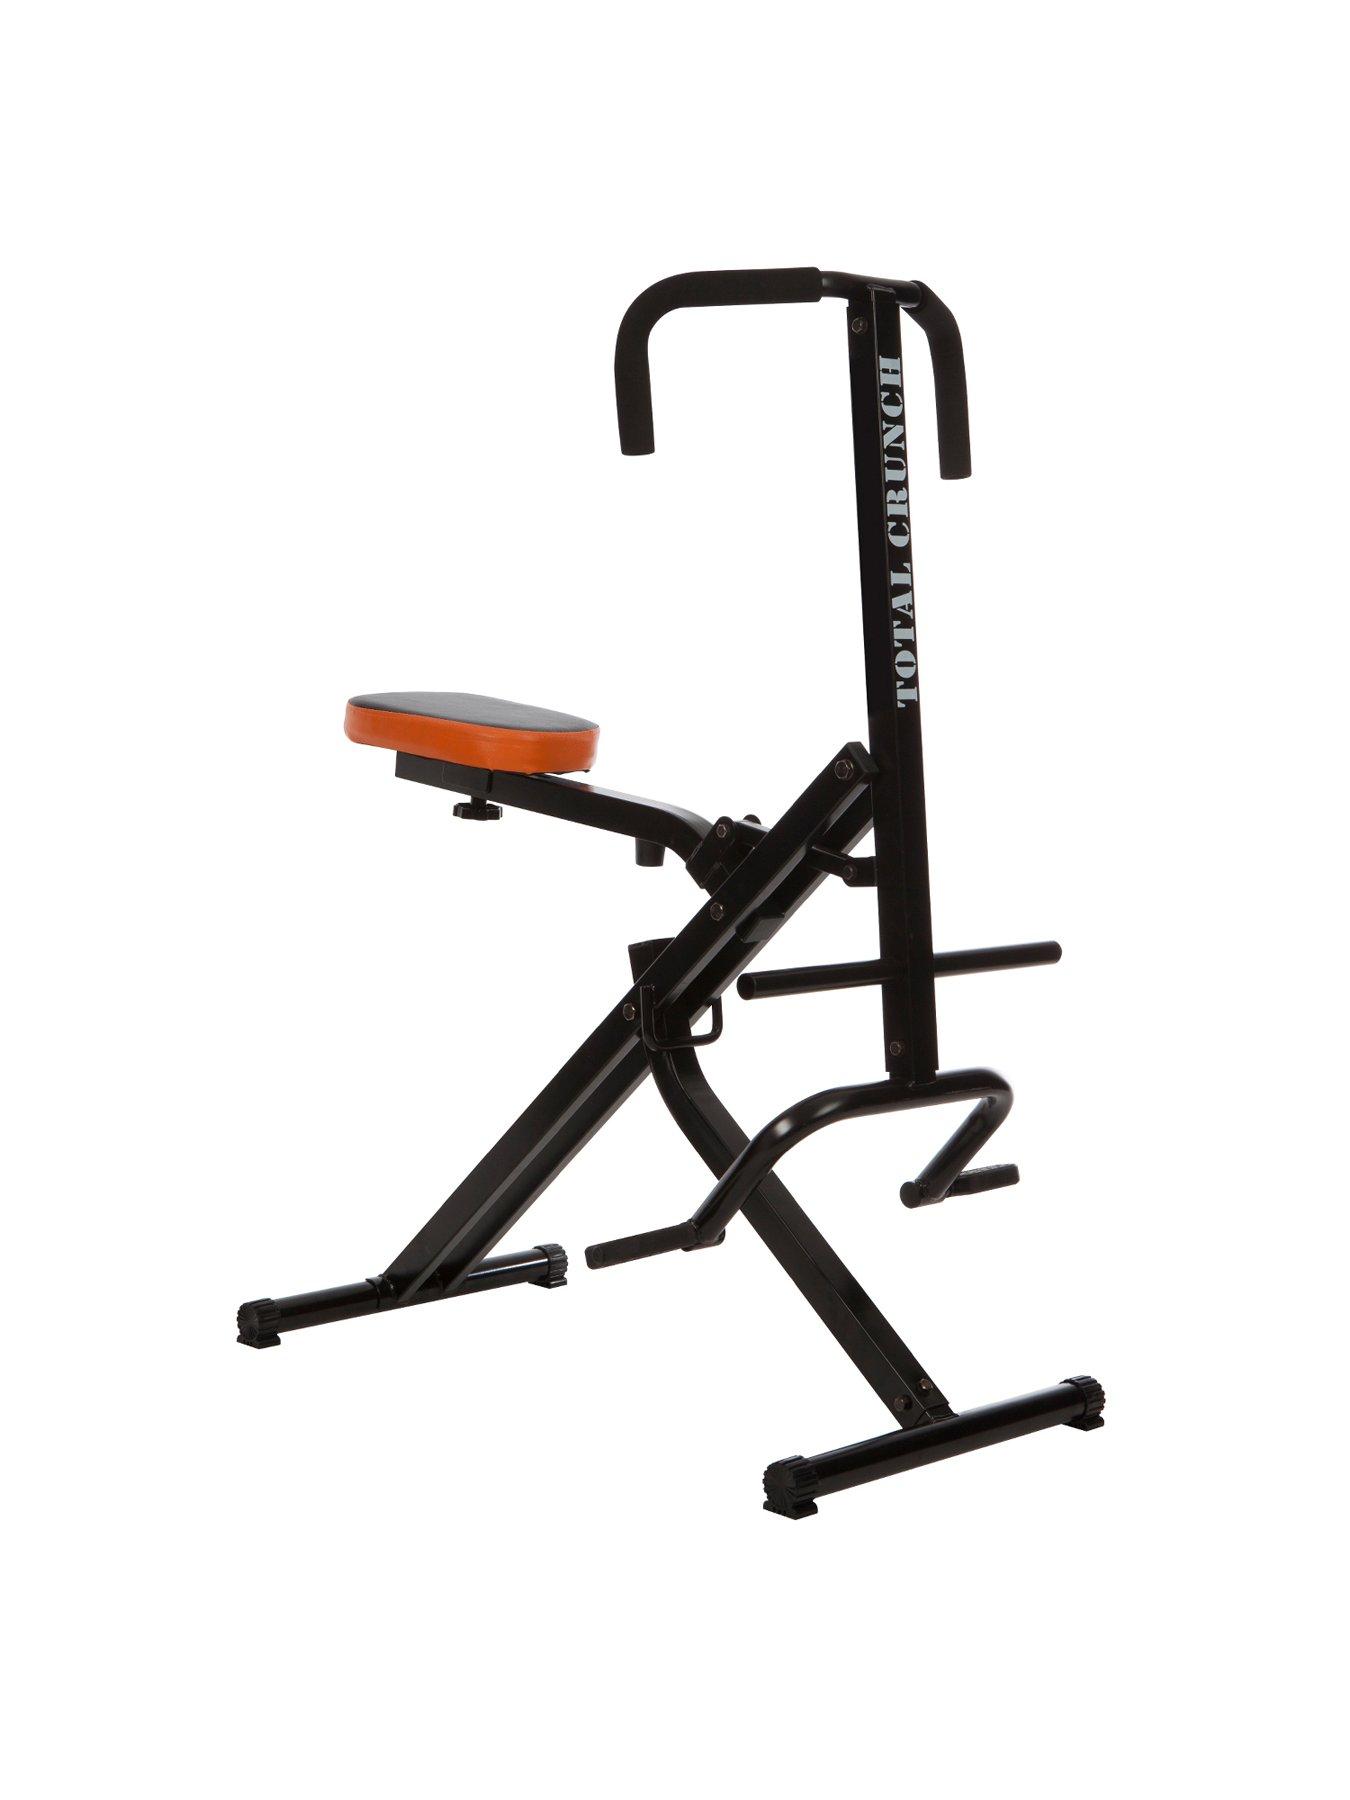 Total Crunch Whole Body Workout Exercise Machine